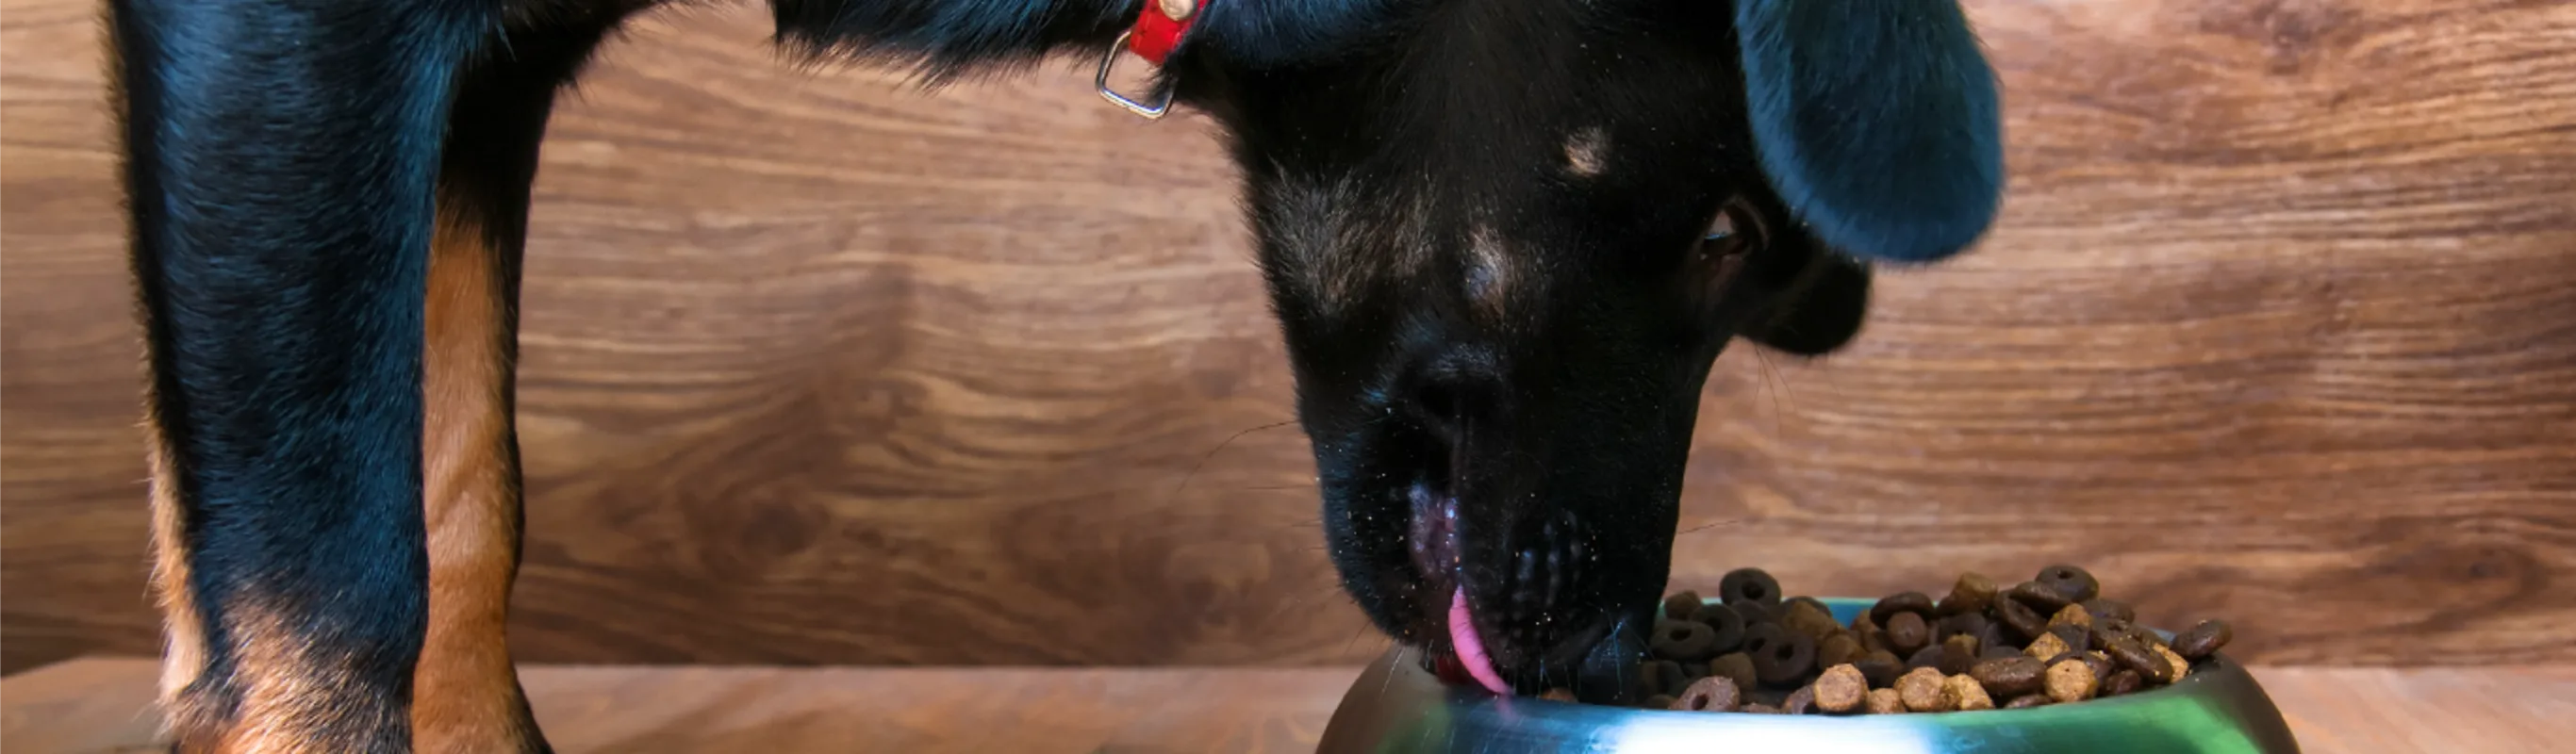 A close up of a large black dog eating food from a bowl